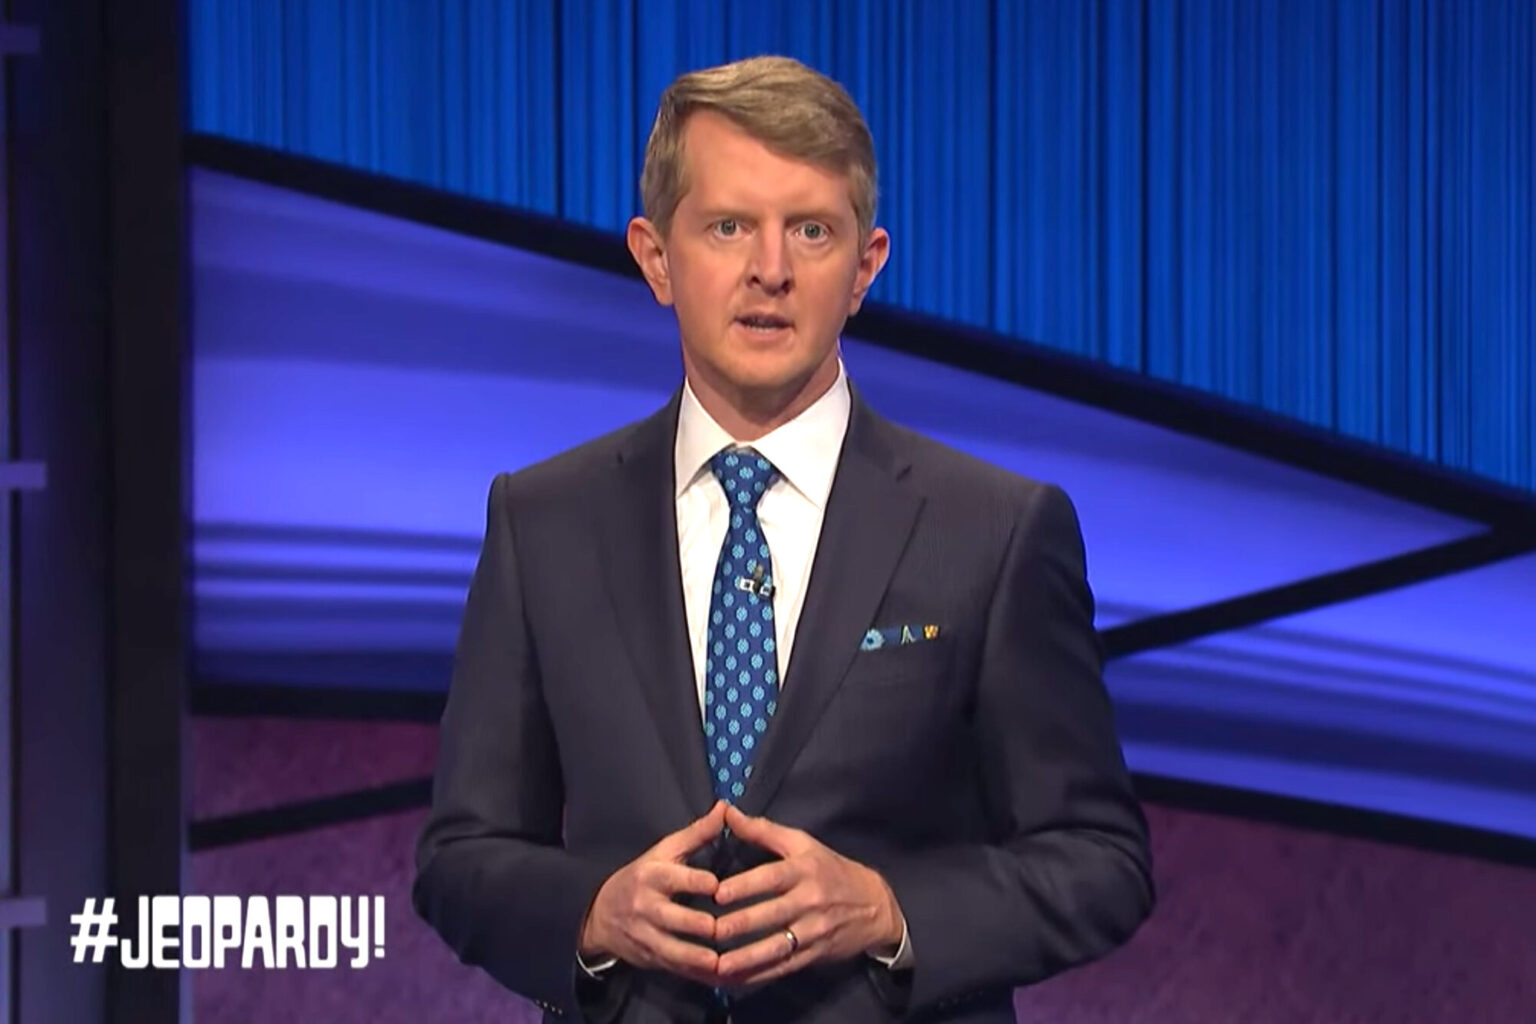 Is 'Jeopardy' too off-putting without Alex Trebek? Here’s what the audience thought of Ken Jennings as the new host of 'Jeopardy'.